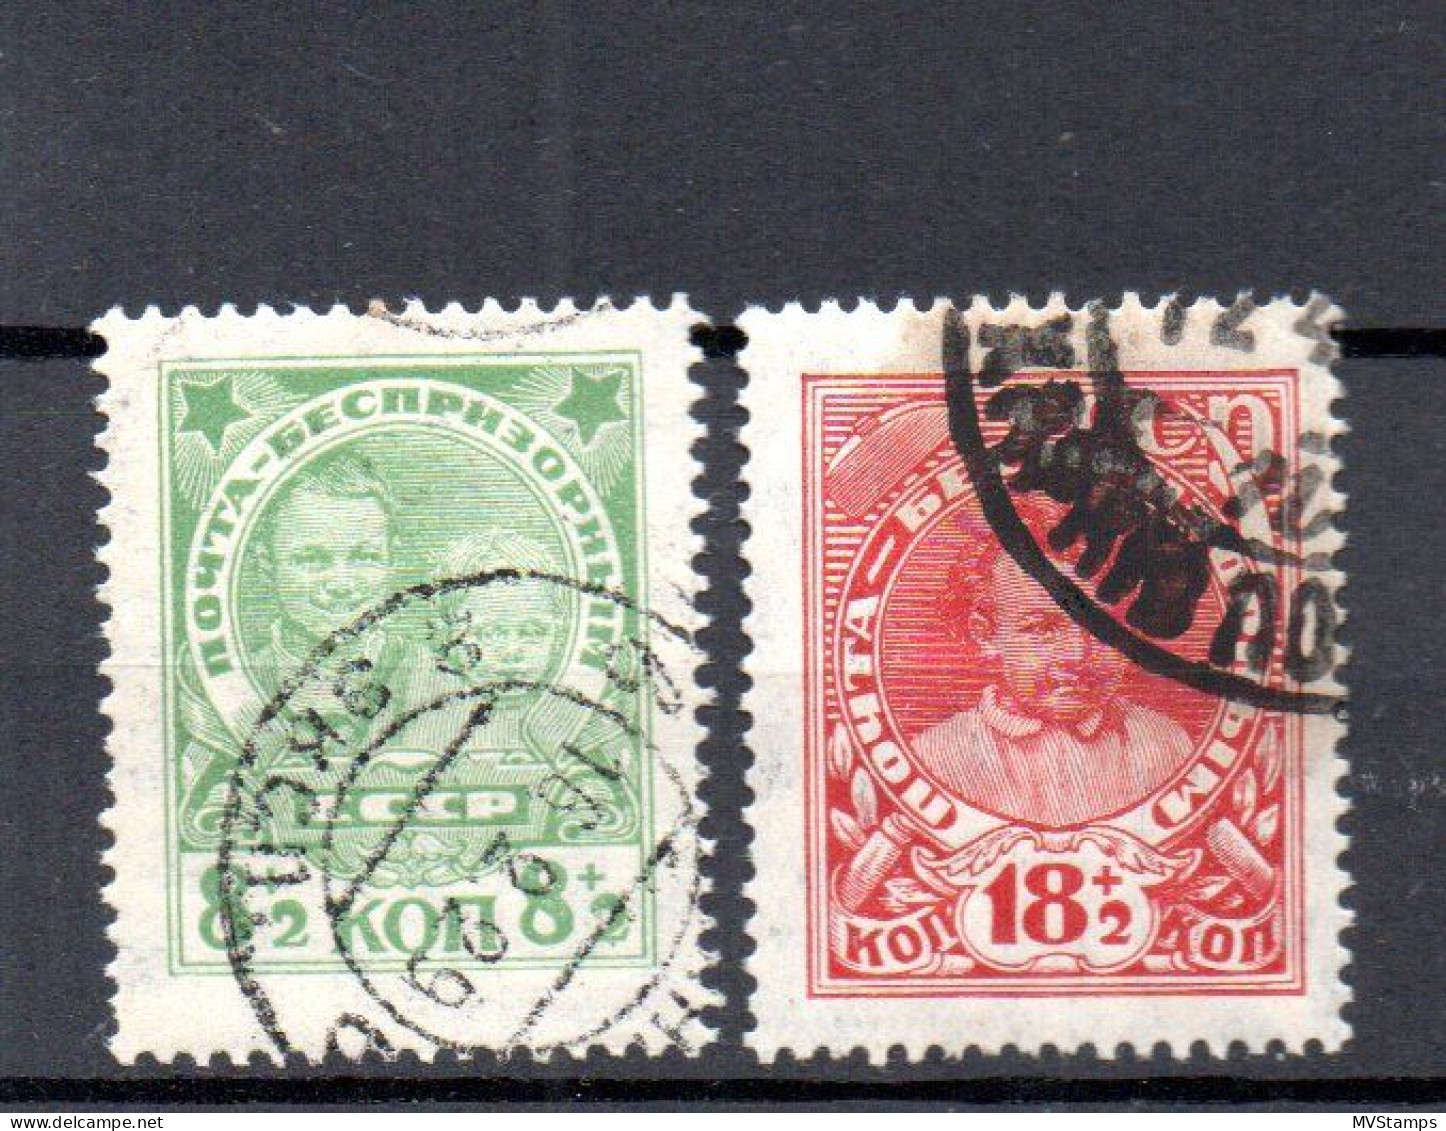 Russia 1927 Old Set Children Help Stamps (Michel 315/16) Nice Used - Usati